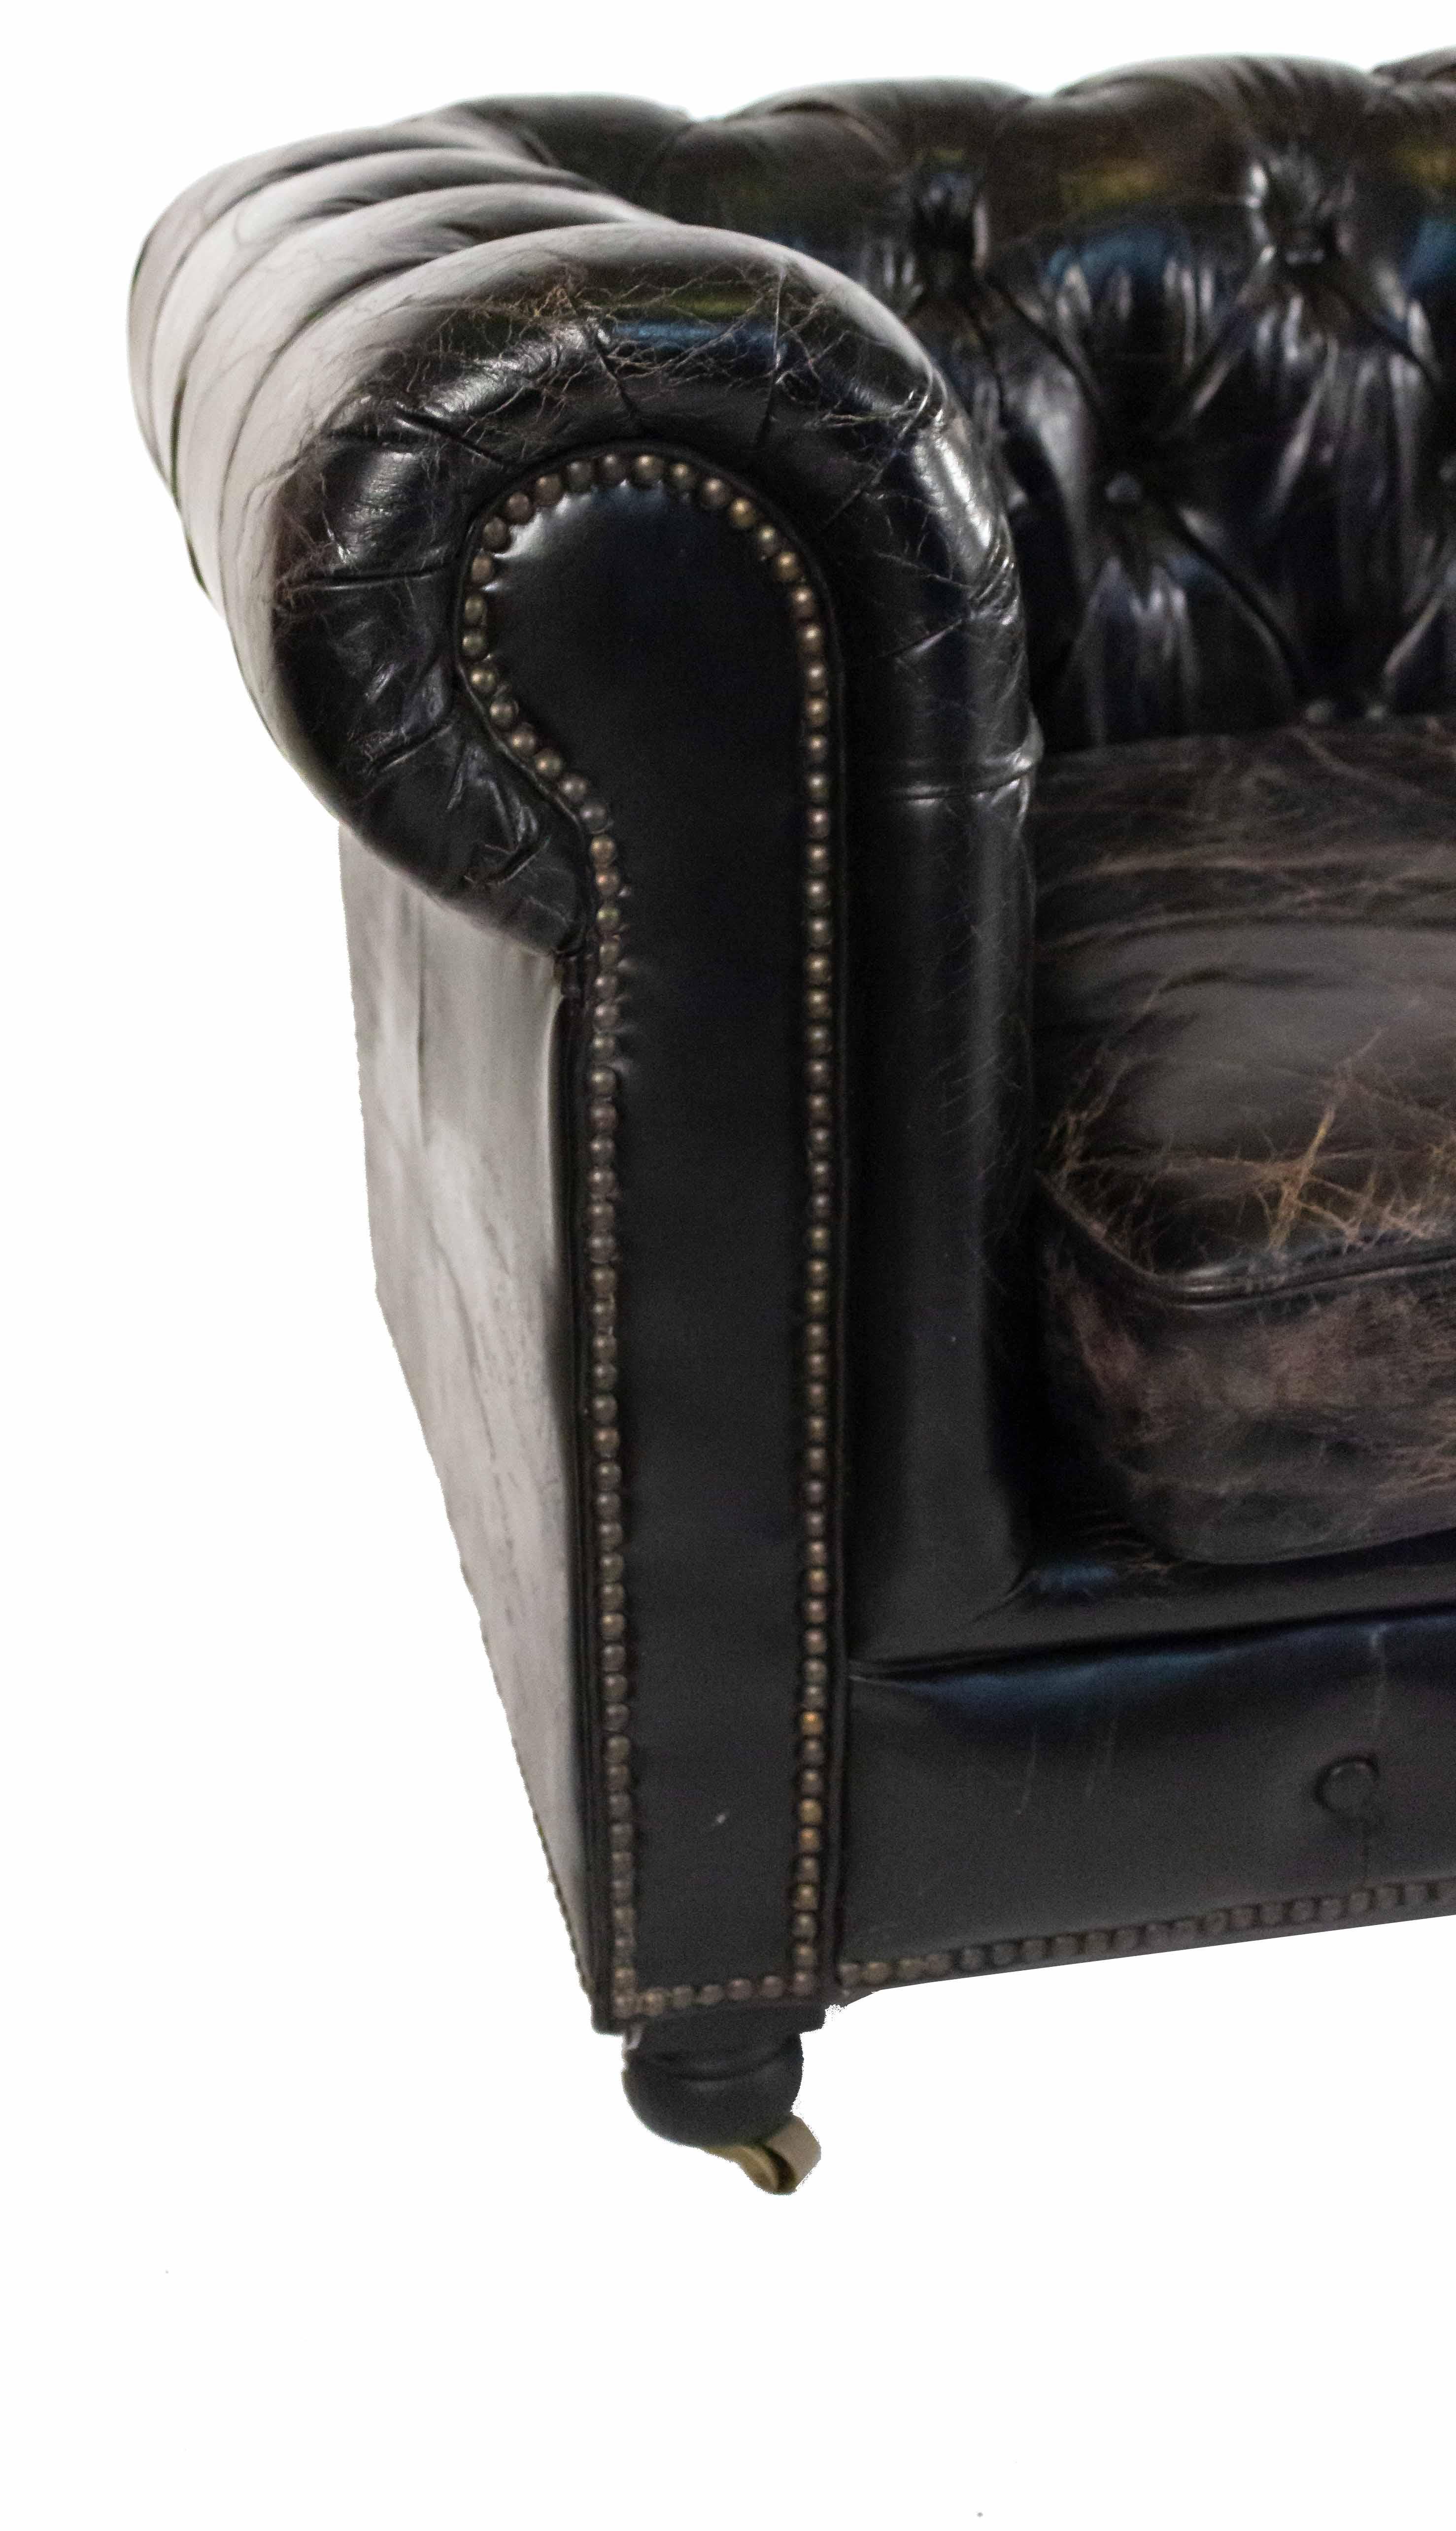 Black Leather Chesterfield Sofa 1